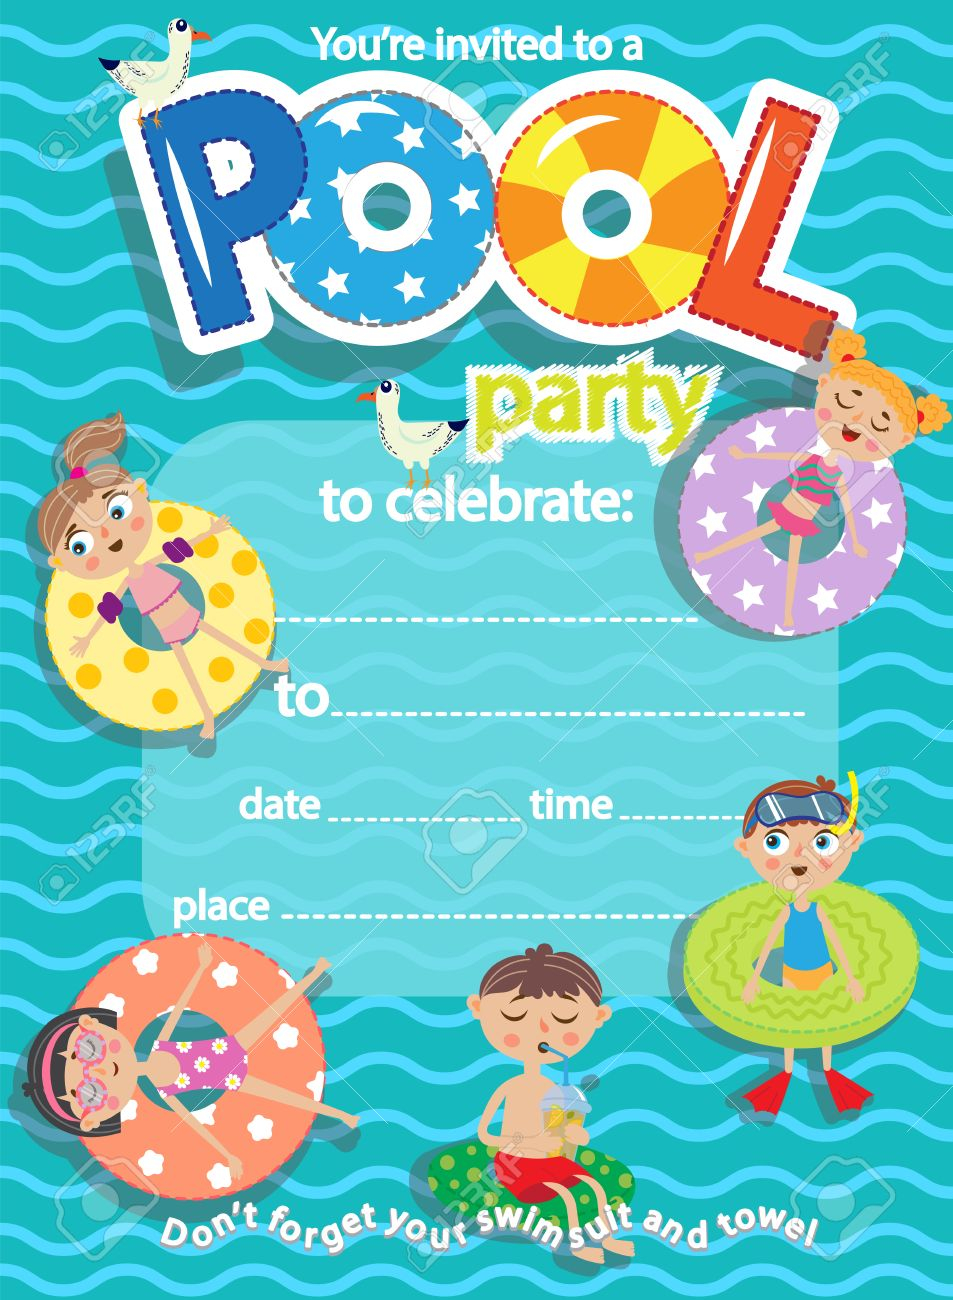 Pool Party Invitation Template Card Kids Fun In Pool Royalty Free intended for sizing 953 X 1300